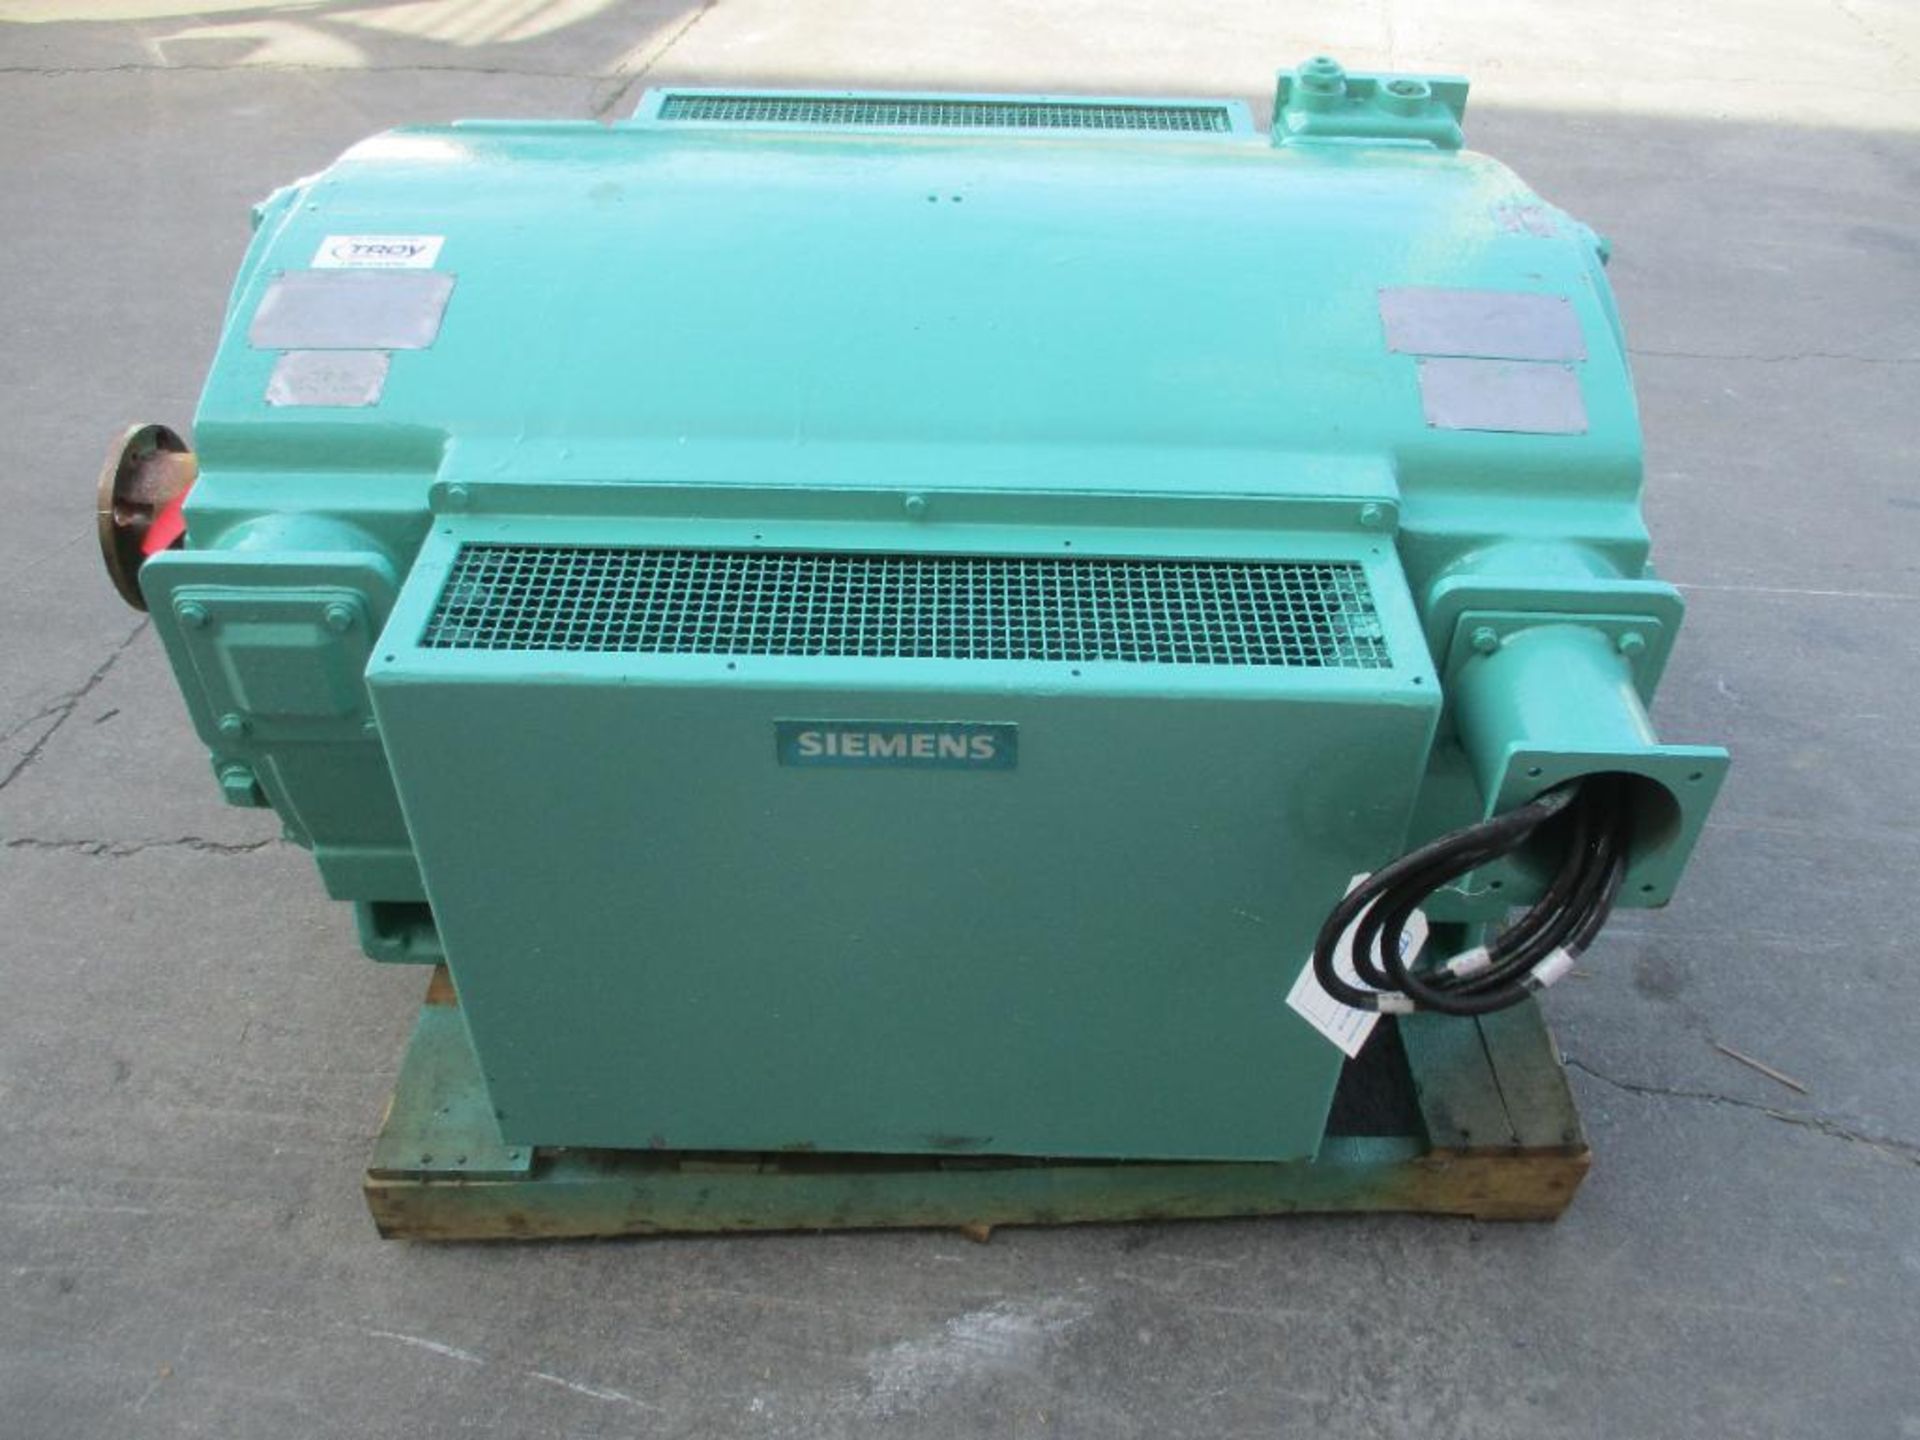 SIEMENS 3 PHASE 800HP 3563RPM 5010S FRAME A/C MOTOR P/N 1796567-13316 (THIS LOT IS FOB KNOXVILLE TN) - Image 3 of 5